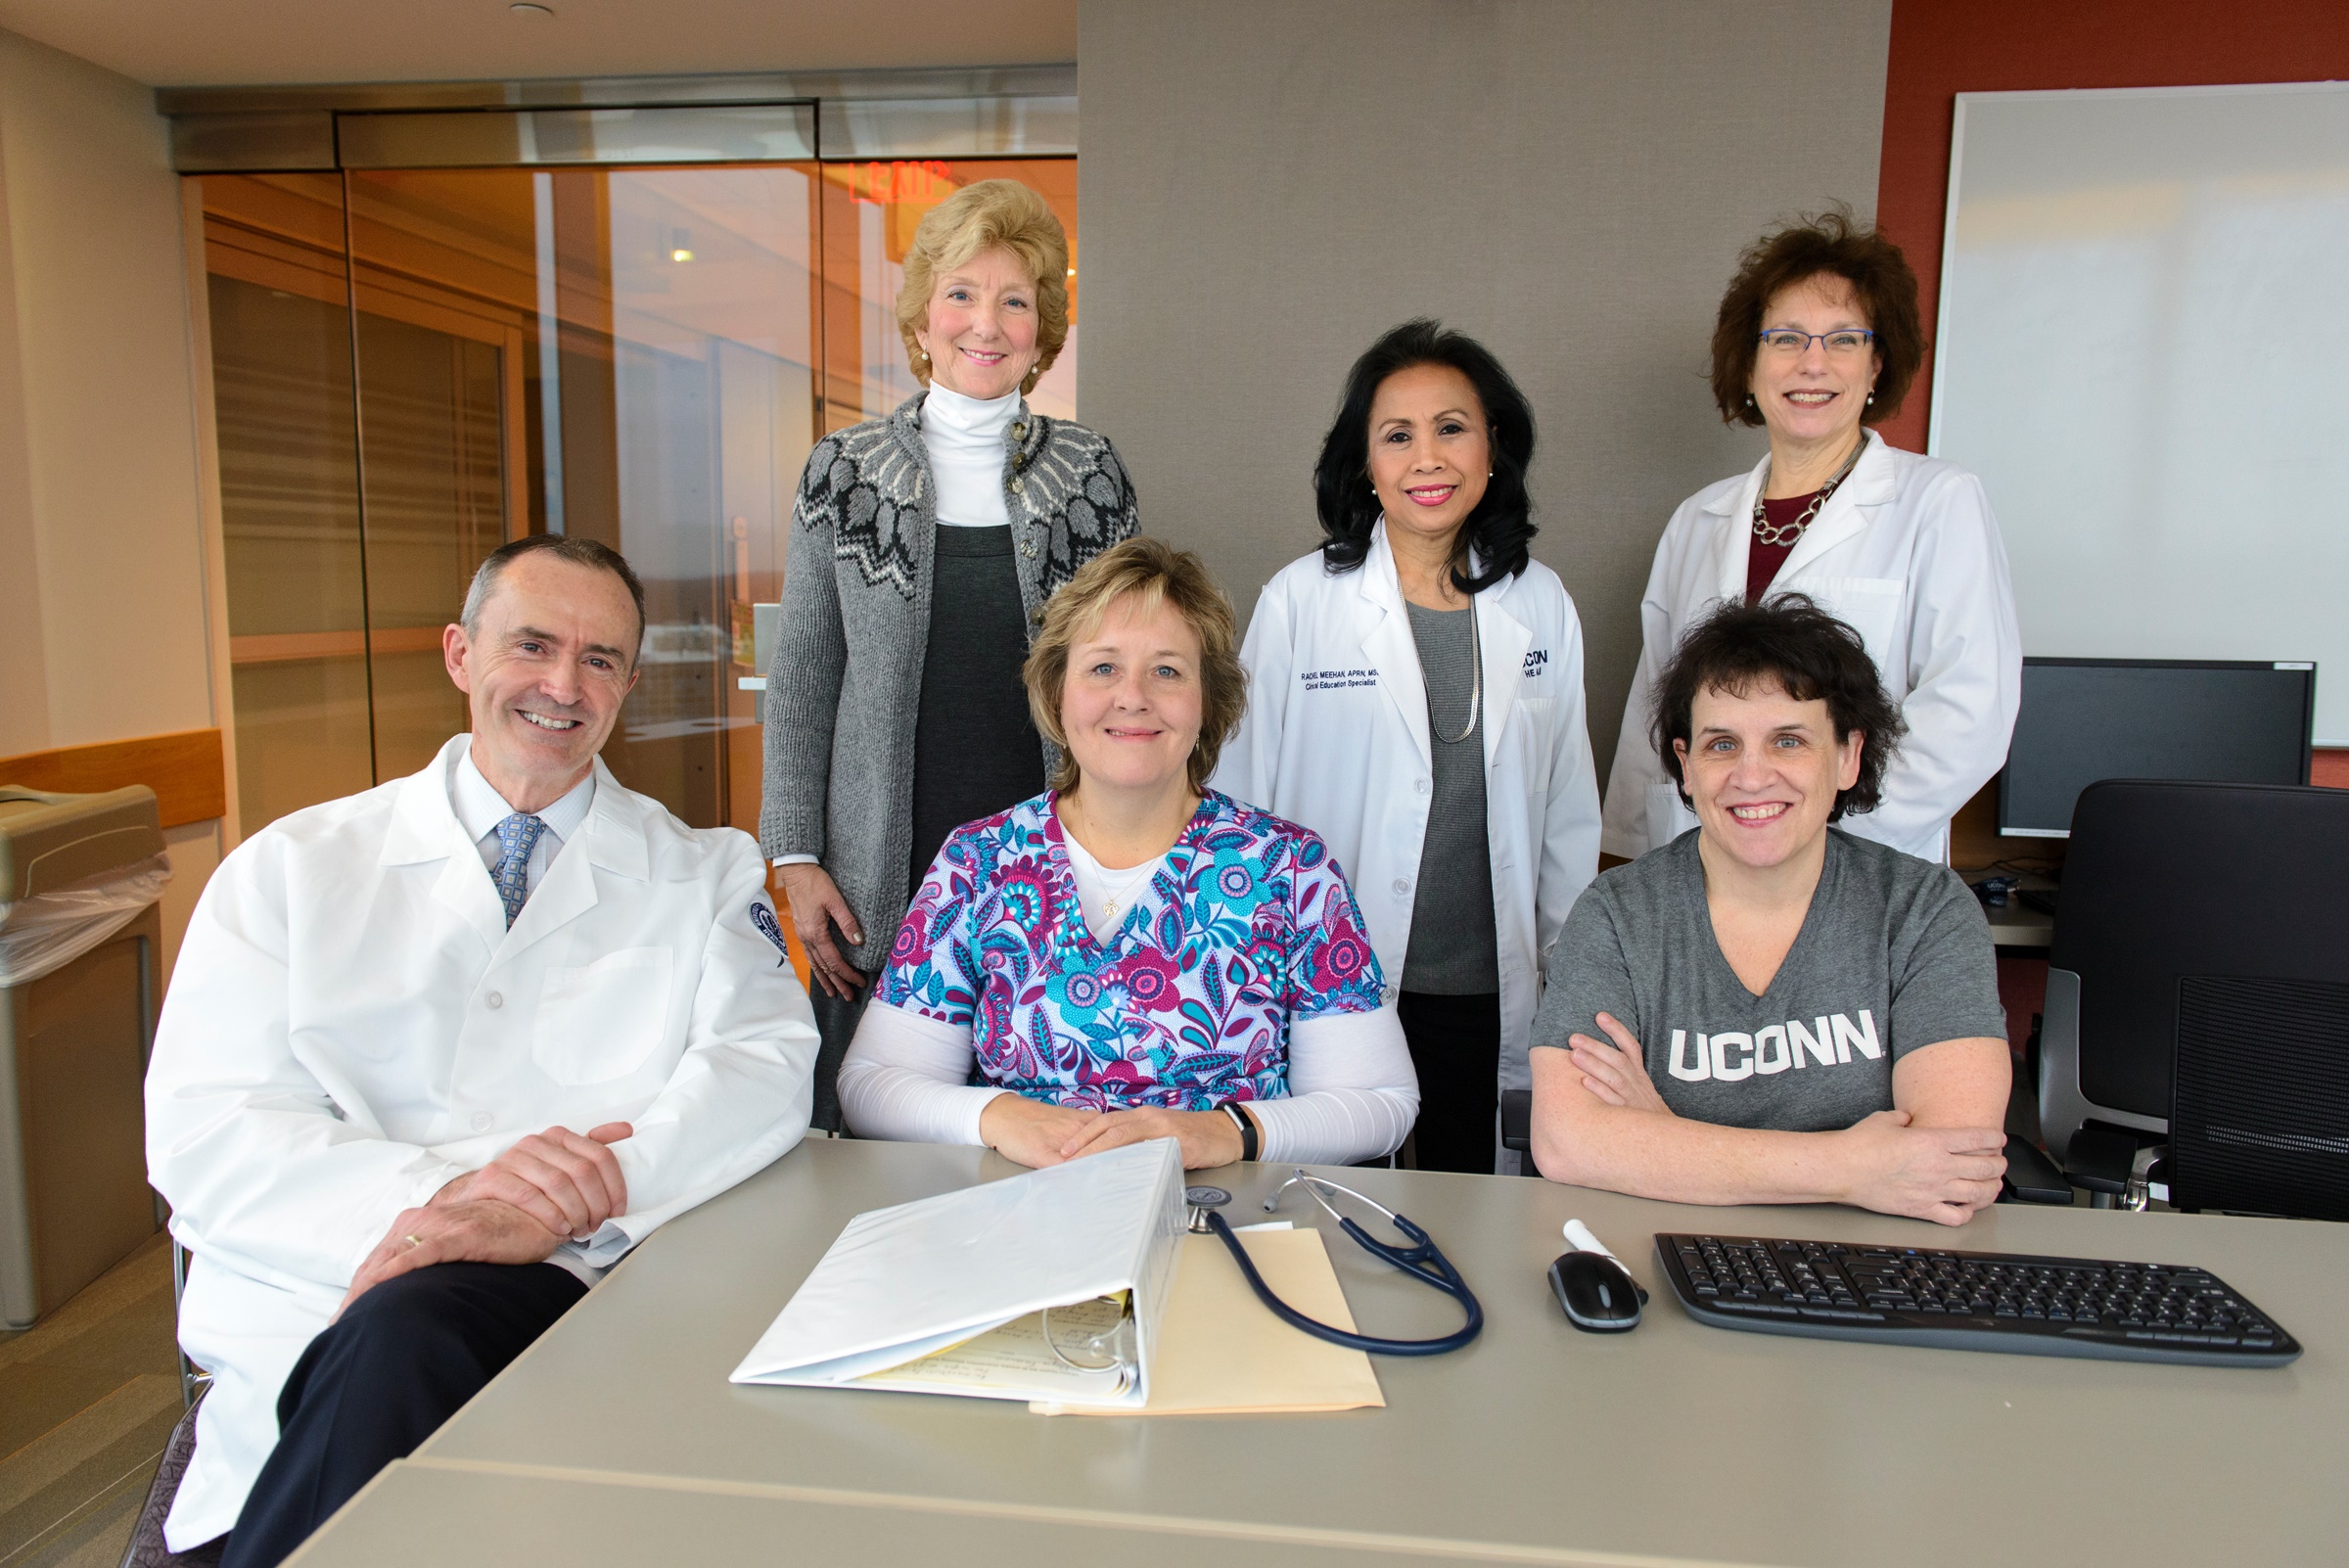 UConn Health's new NICHE program's leadership team is bringing together all resources and interdisciplinary staff to further enhance care for older adults 65 years of age and older (Photo: UConn Health/Janine Gelineau).